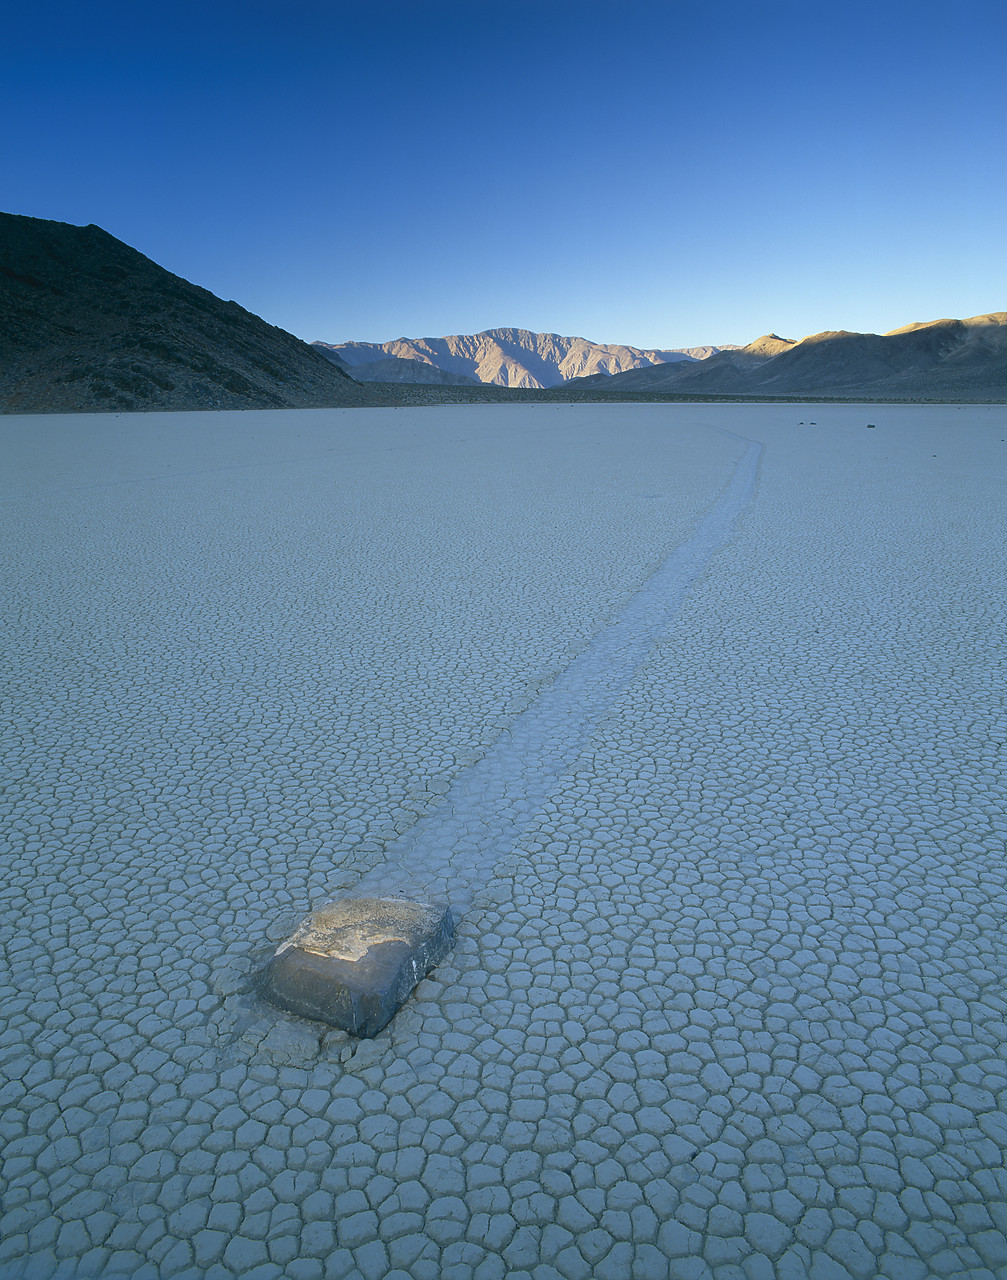 #020677-3 - The Racetrack, Death Valley National Park, California, USA